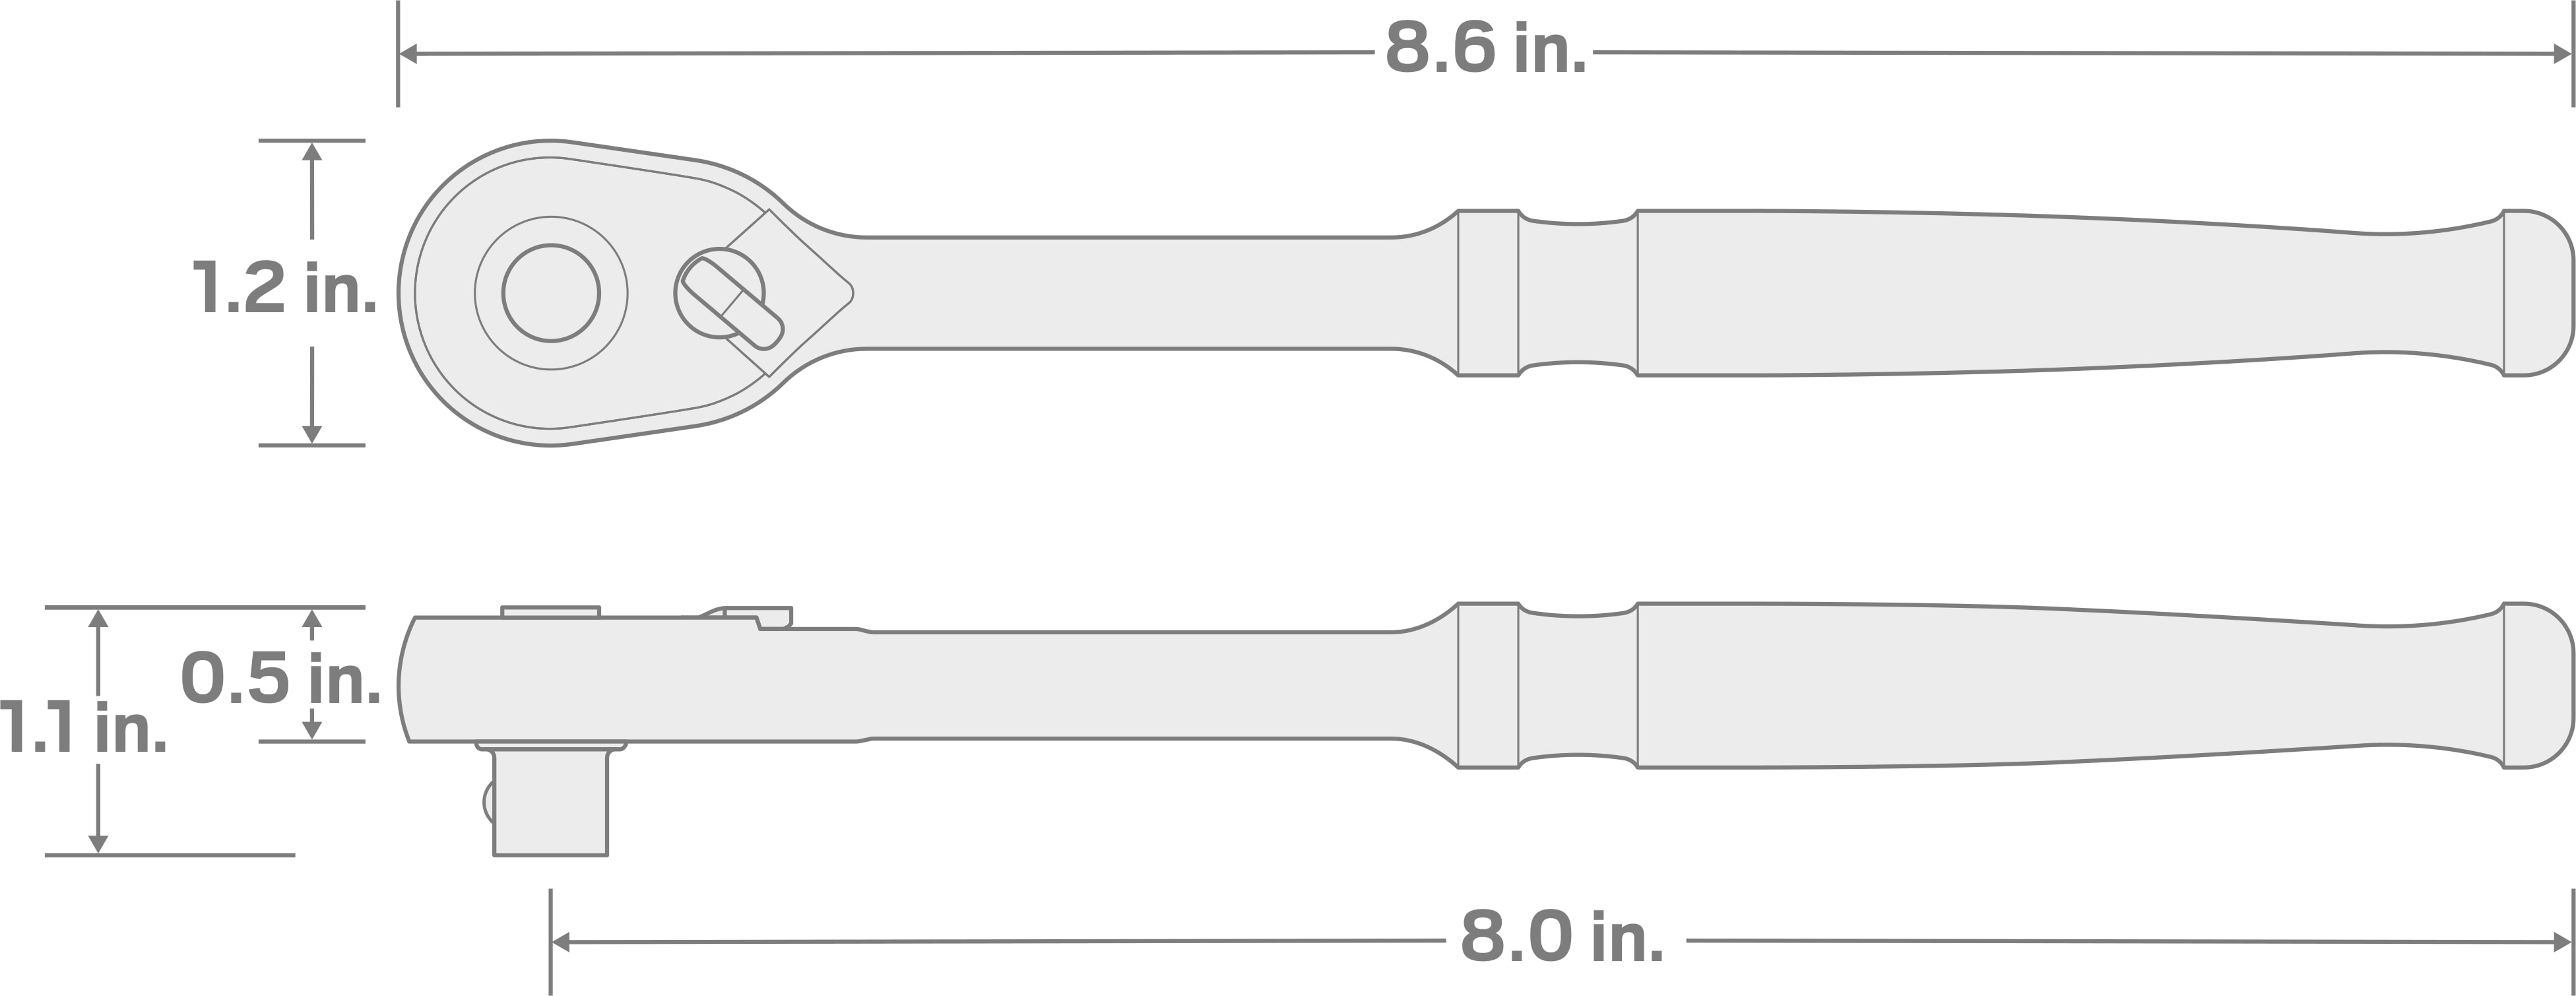 Specs for 3/8 Inch Drive x 8 Inch Quick-Release Ratchet